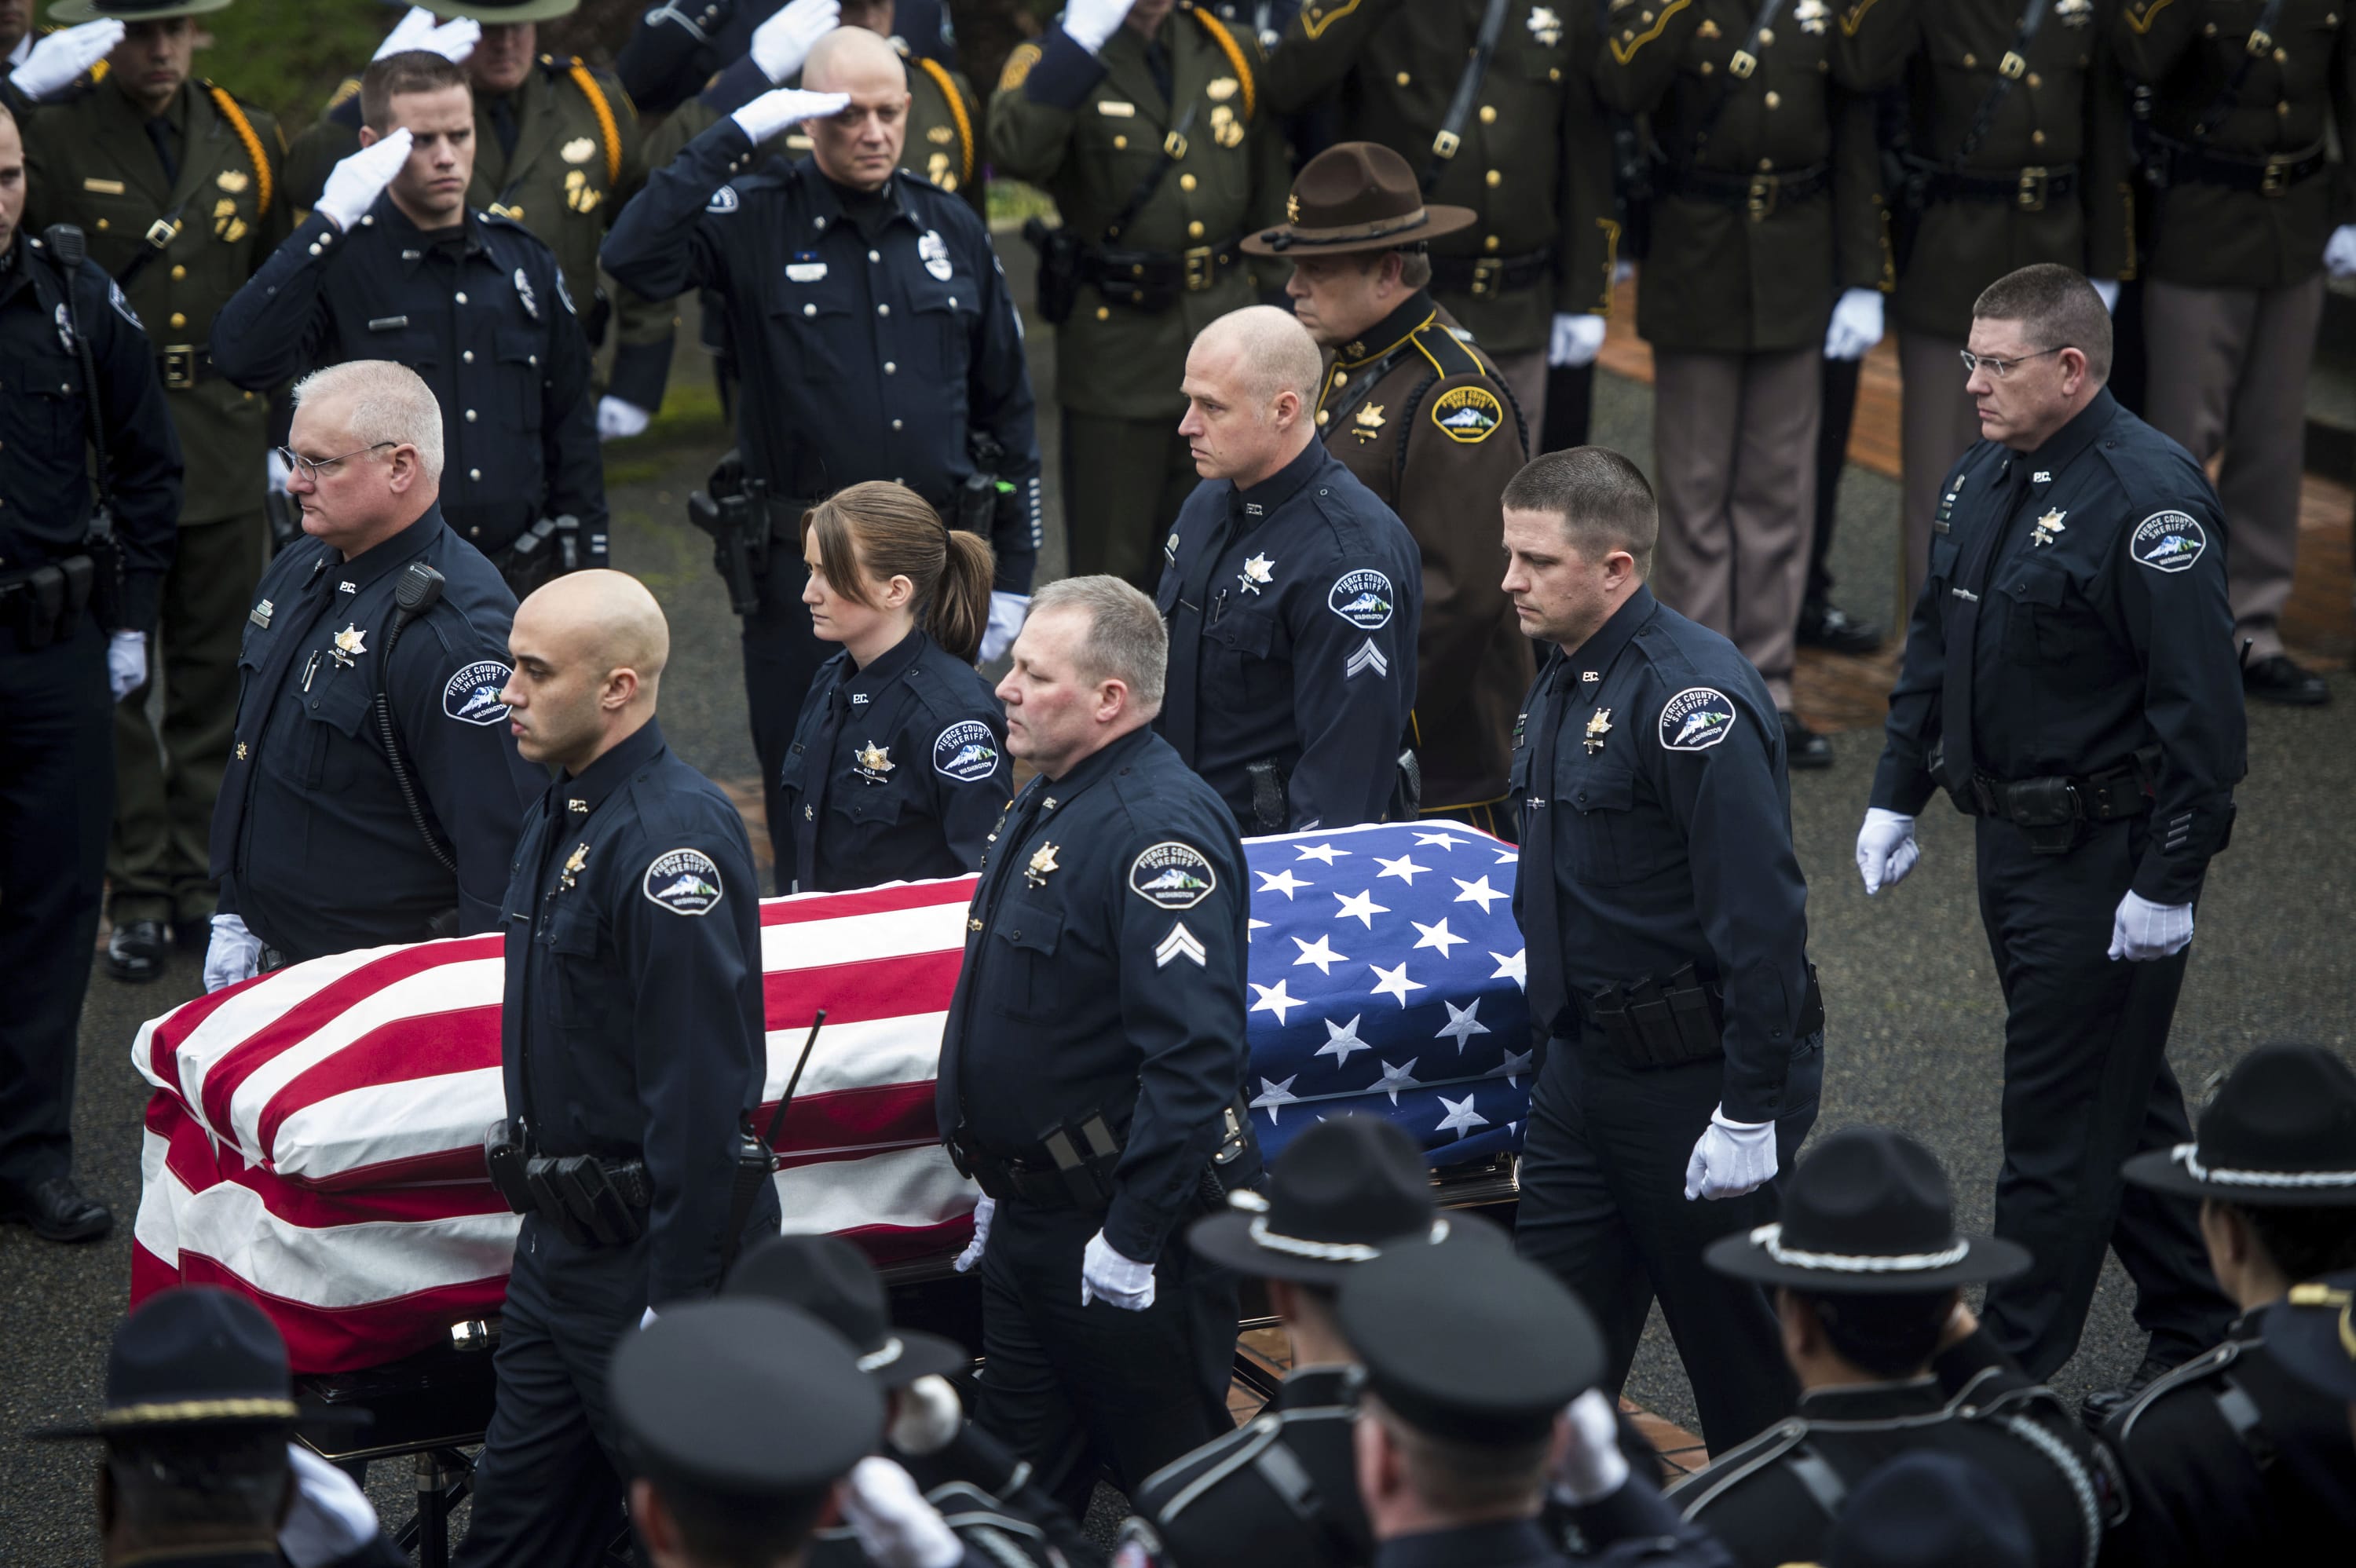 Pallbearers carry Pierce County Sheriff's Deputy Daniel McCartney's casket into Olson Auditorium Wednesday, Jan. 17, 2018, before a memorial service for Pierce County Sheriff's Deputy Daniel McCartney at Pacific Lutheran University in Tacoma, Wash. McCartney died the night of Sunday, Jan. 7, 2018, after being shot while responding to a to a break-in call southeast of Tacoma.